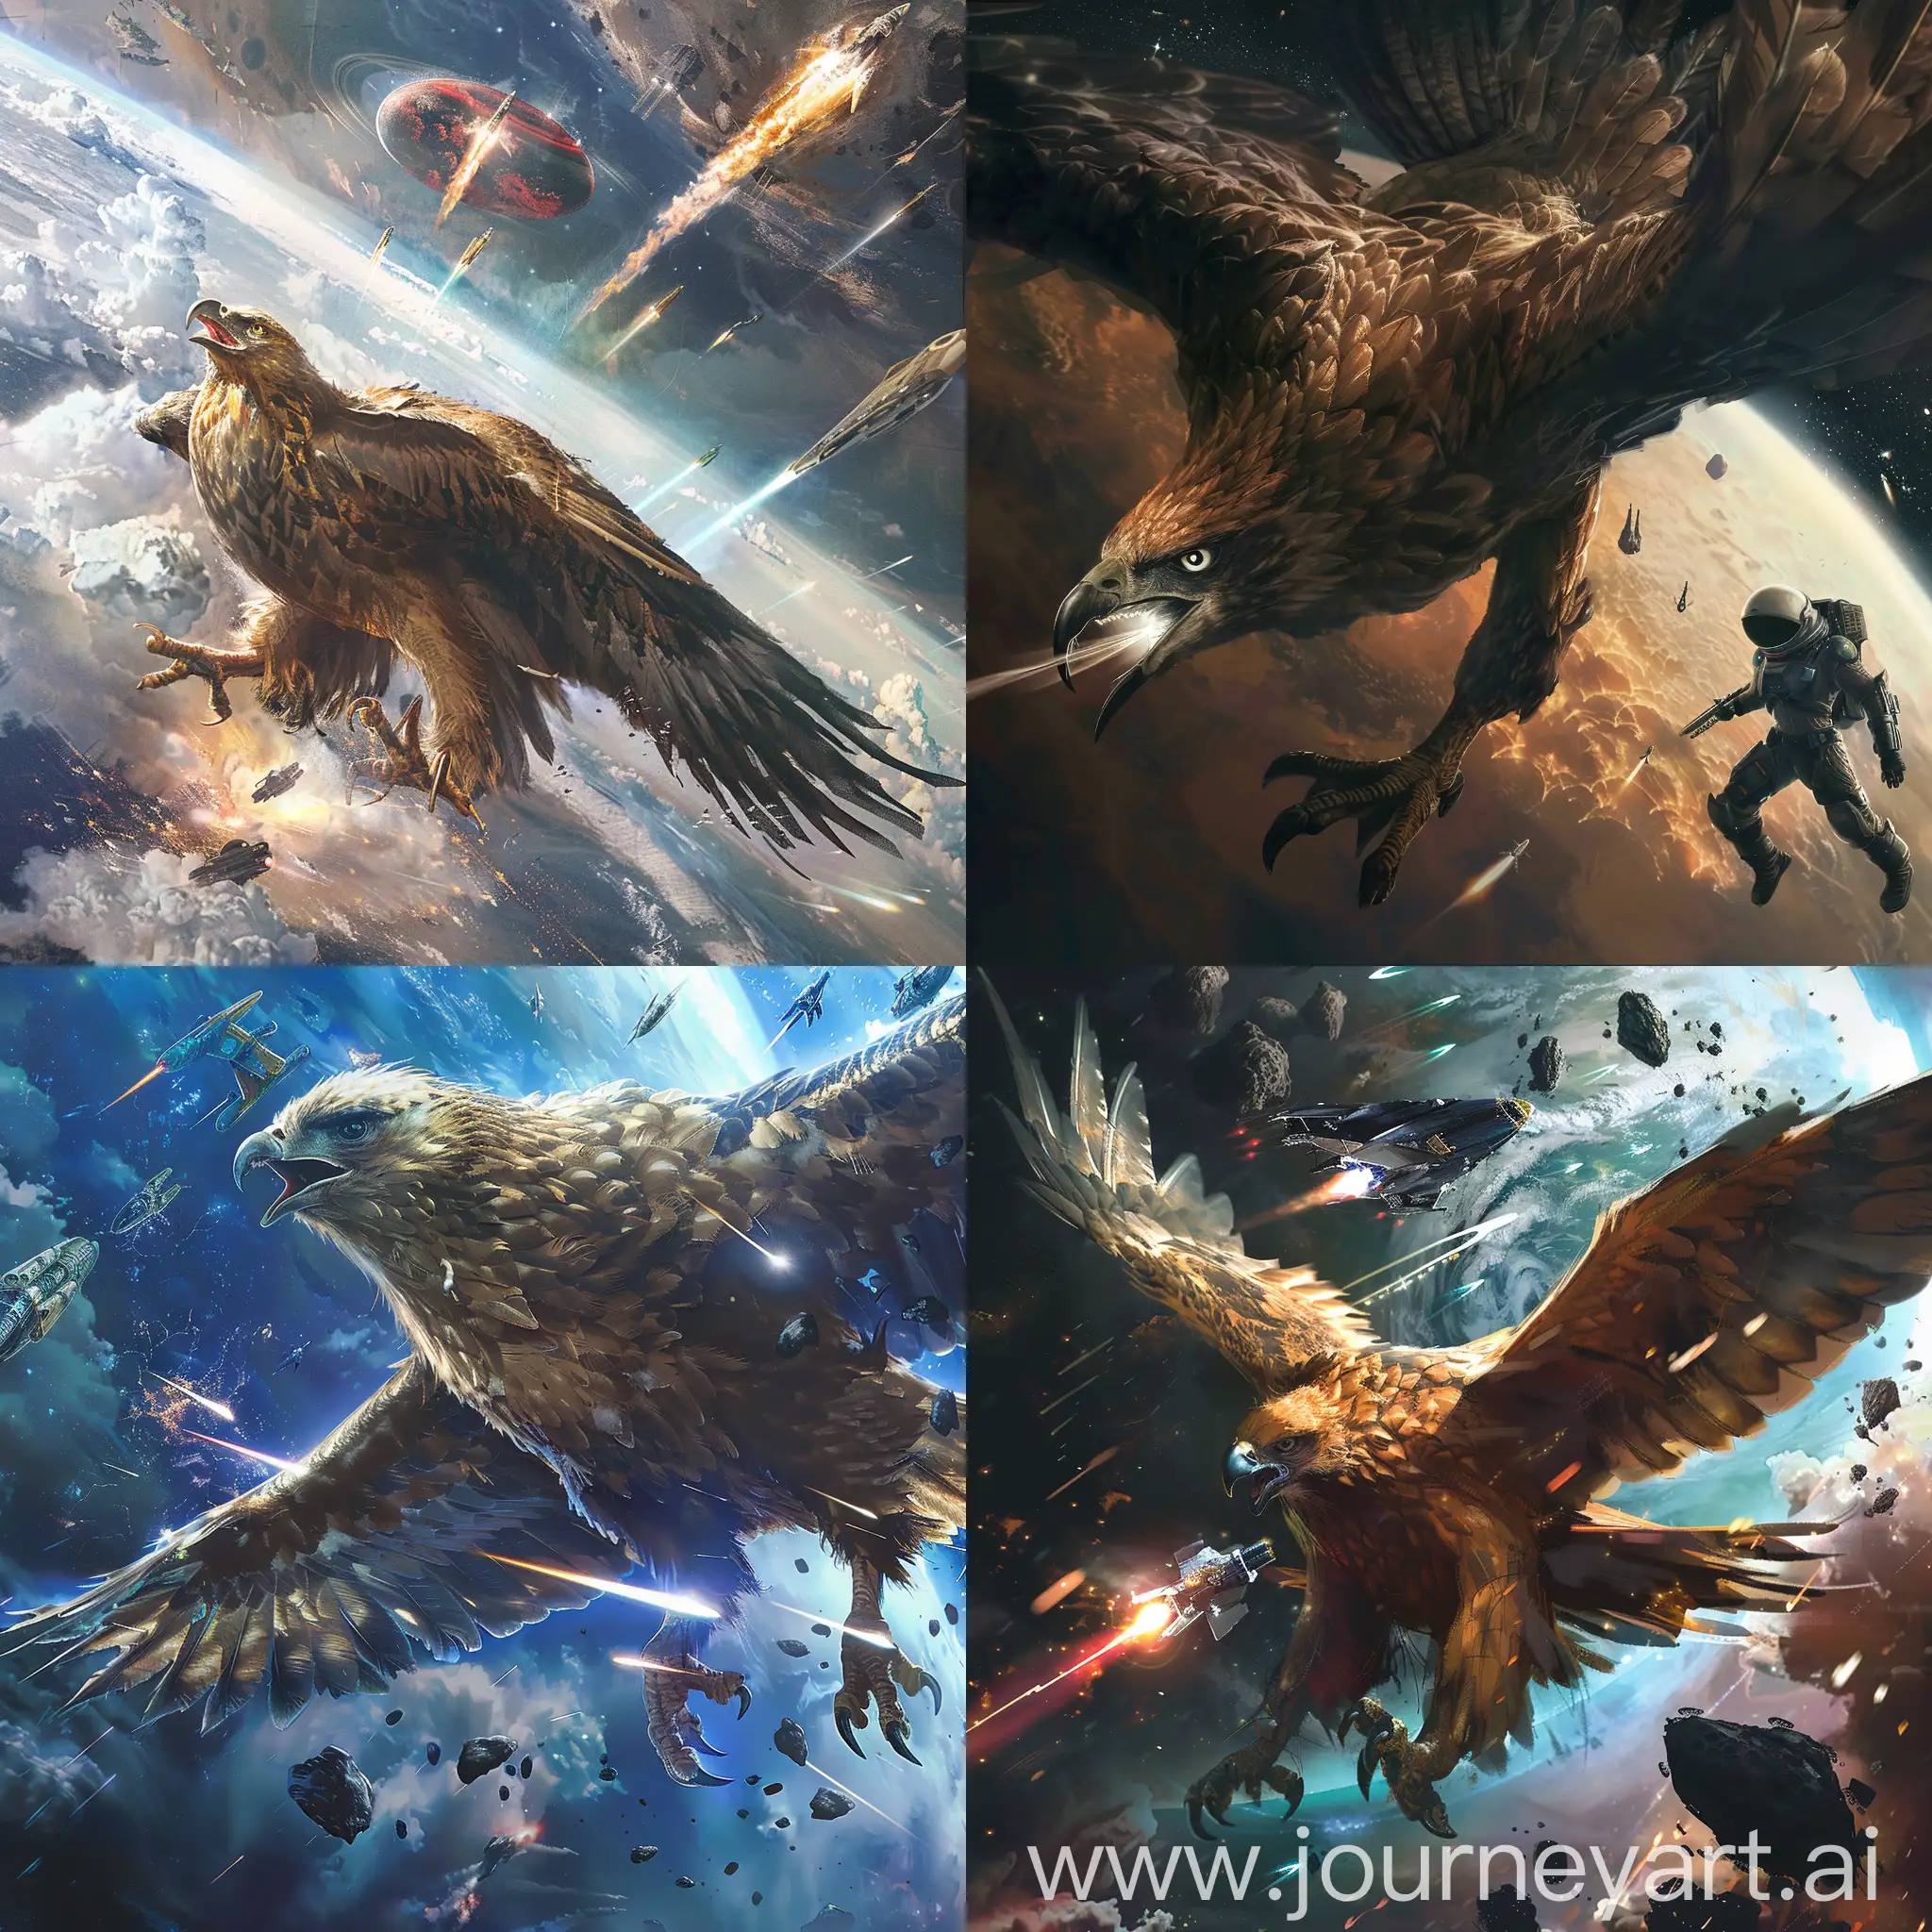 A large feathered bird of prey that fights in space with an alien race that attacks humanity